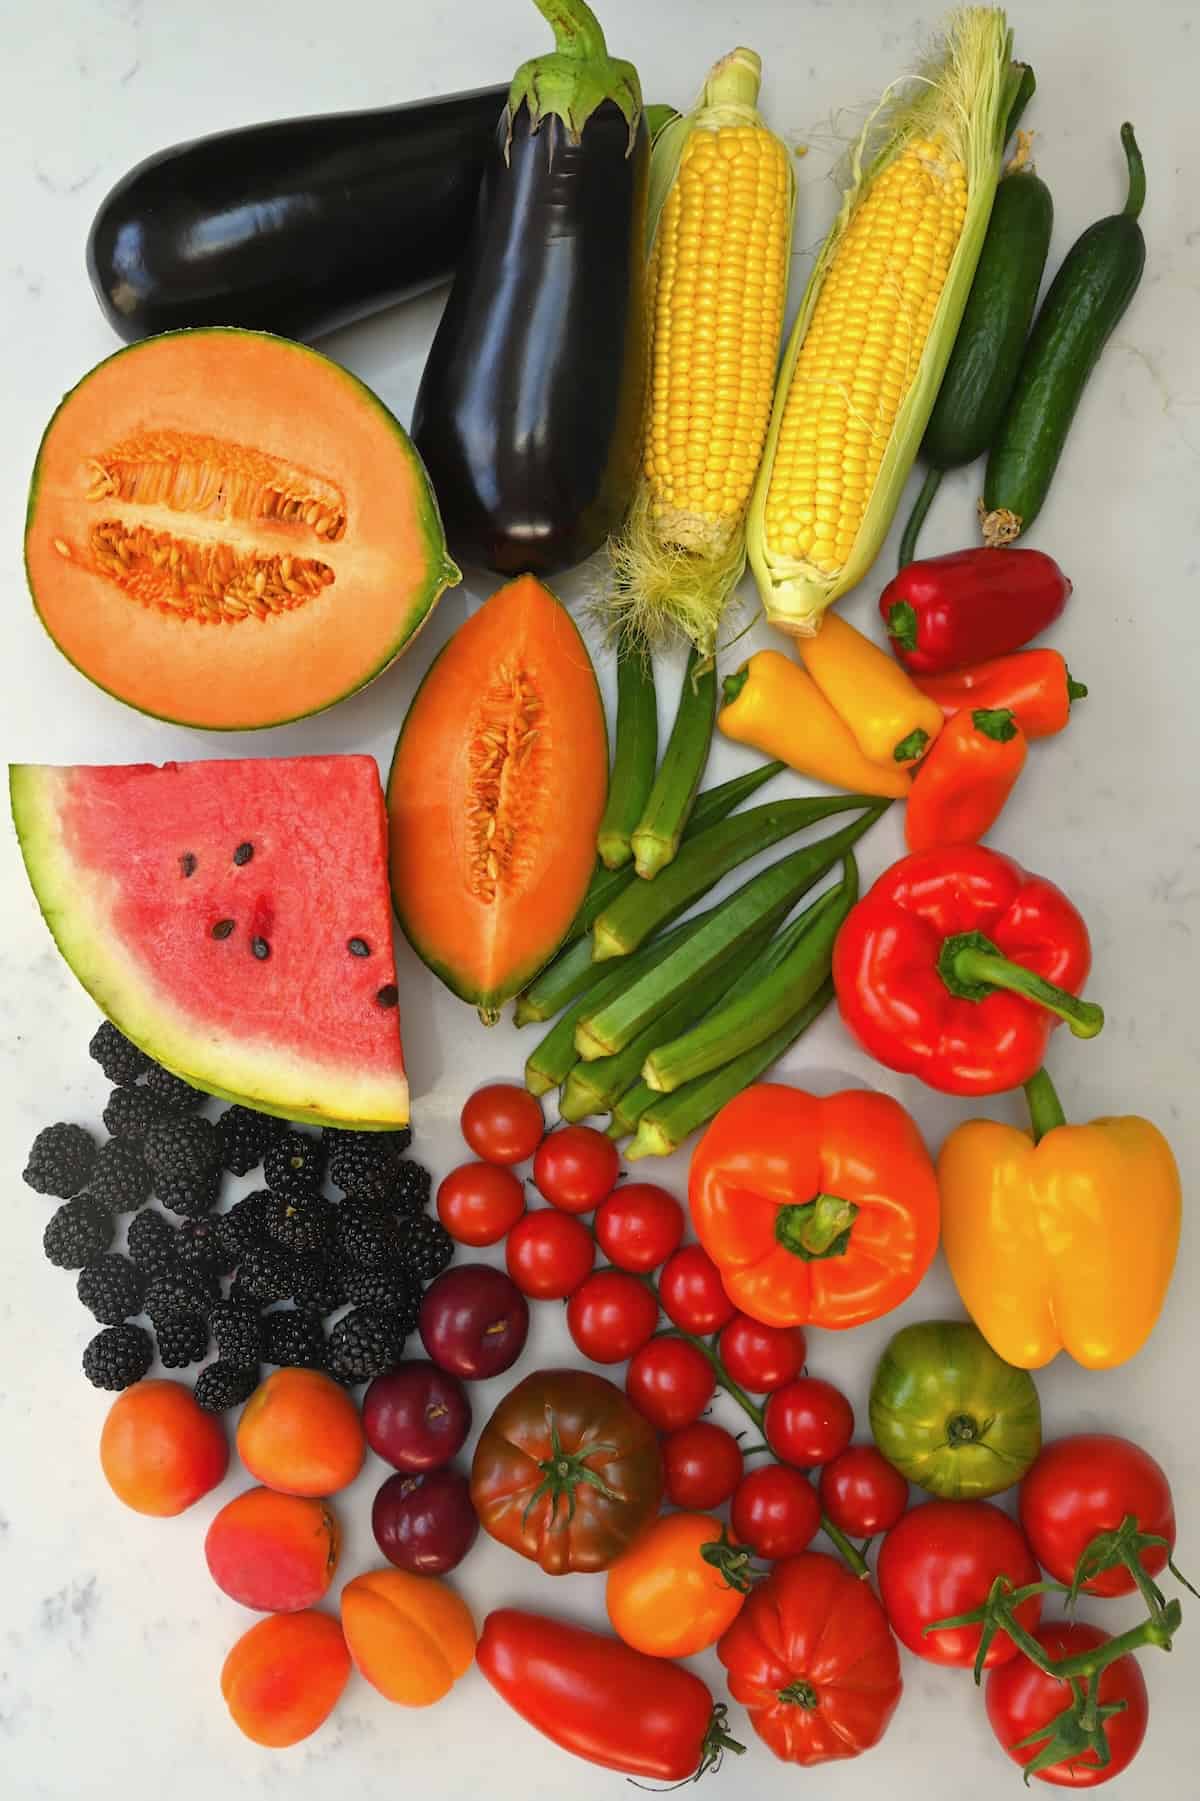 Different fruit and veggies that are in season in August